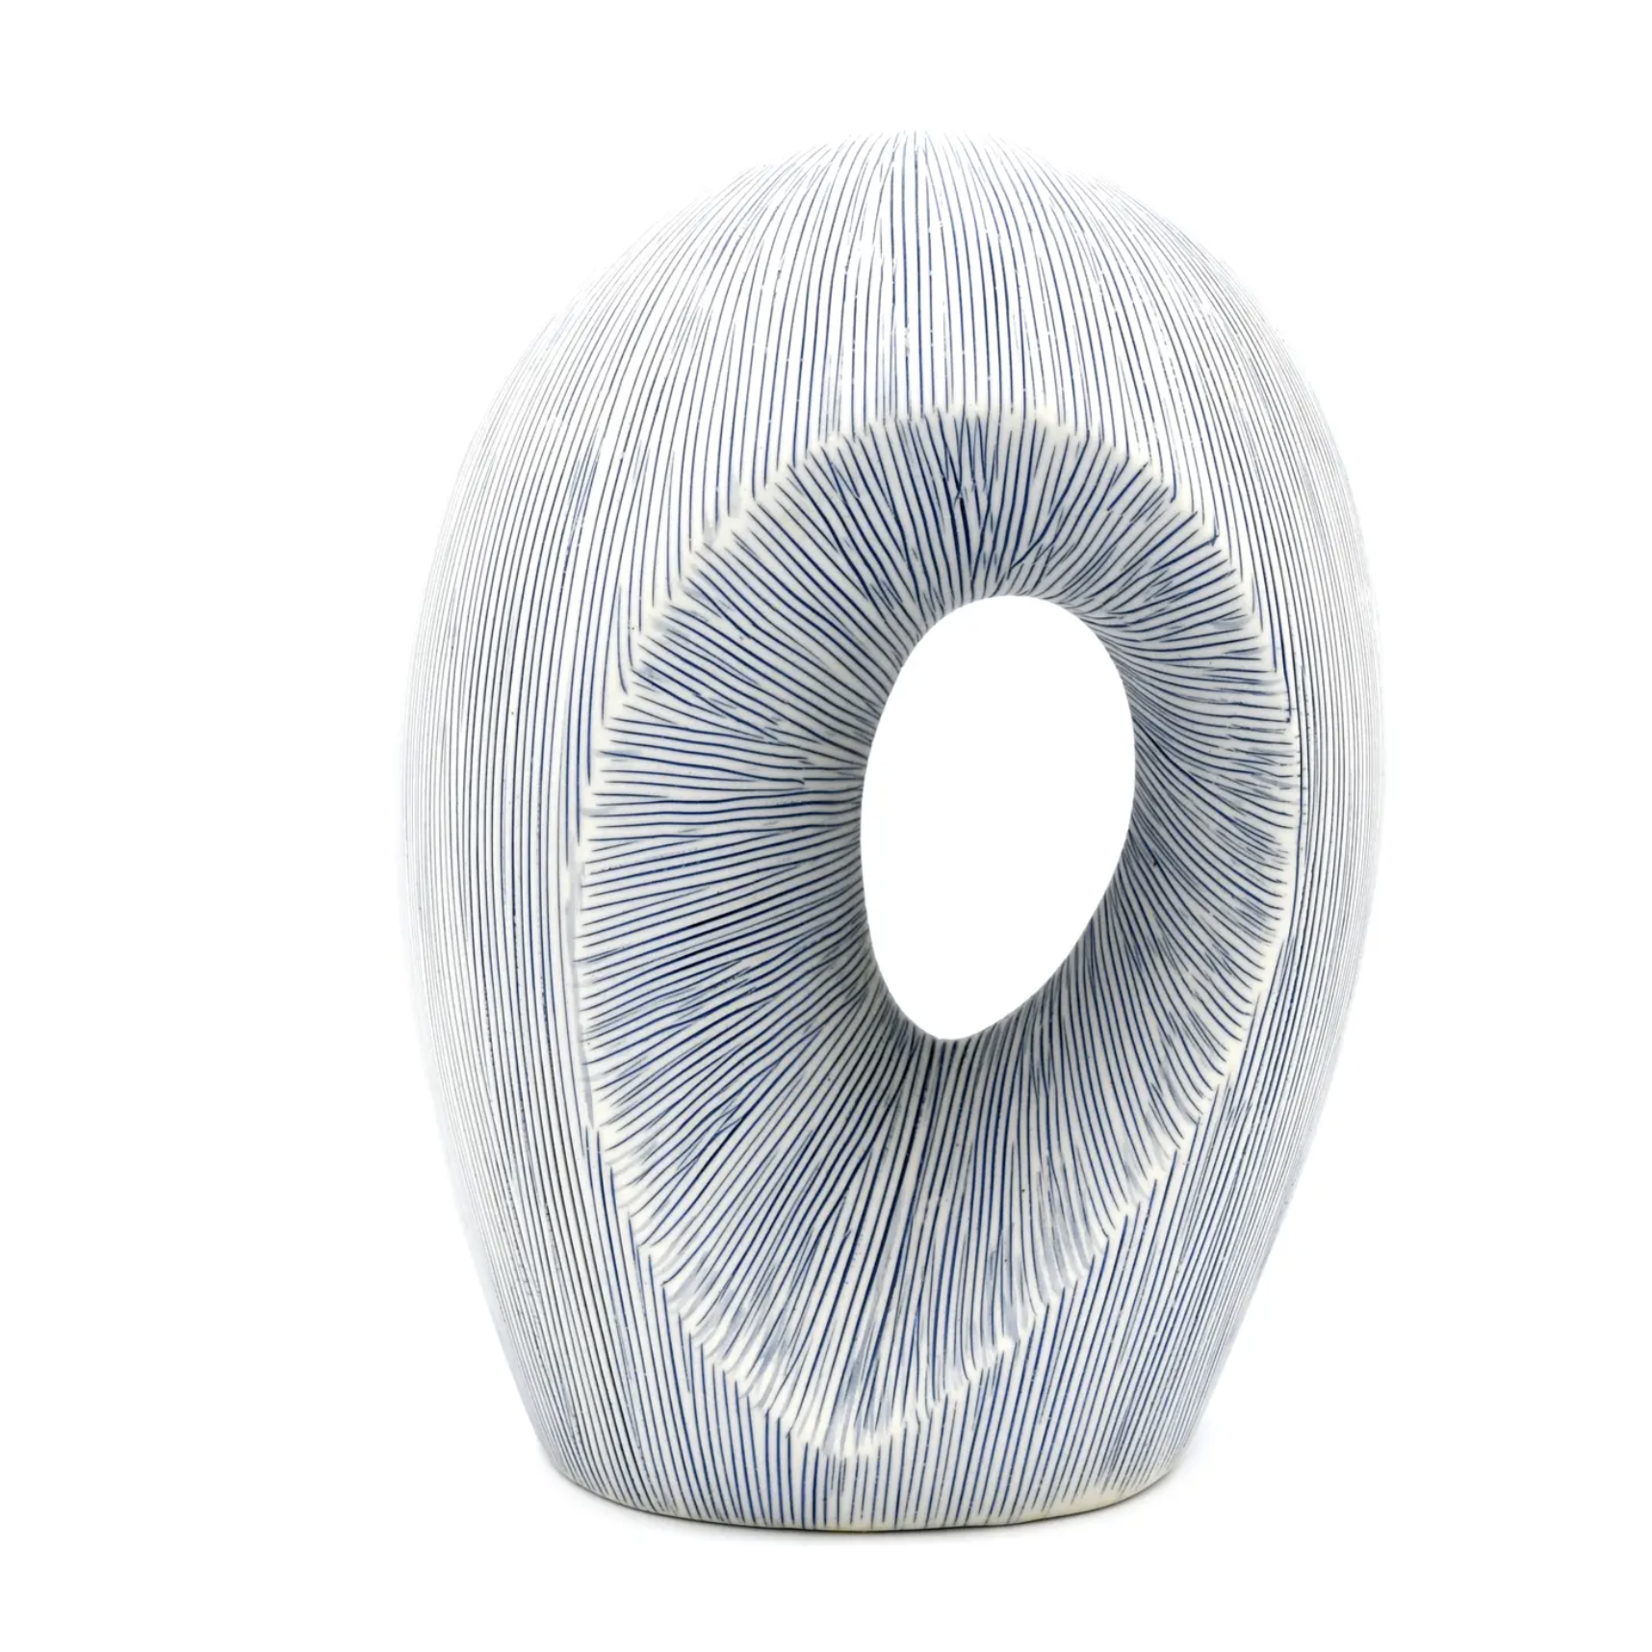 Outside The Box 9" Artura White & Blue Strips Handcrafted Porcelain Vase